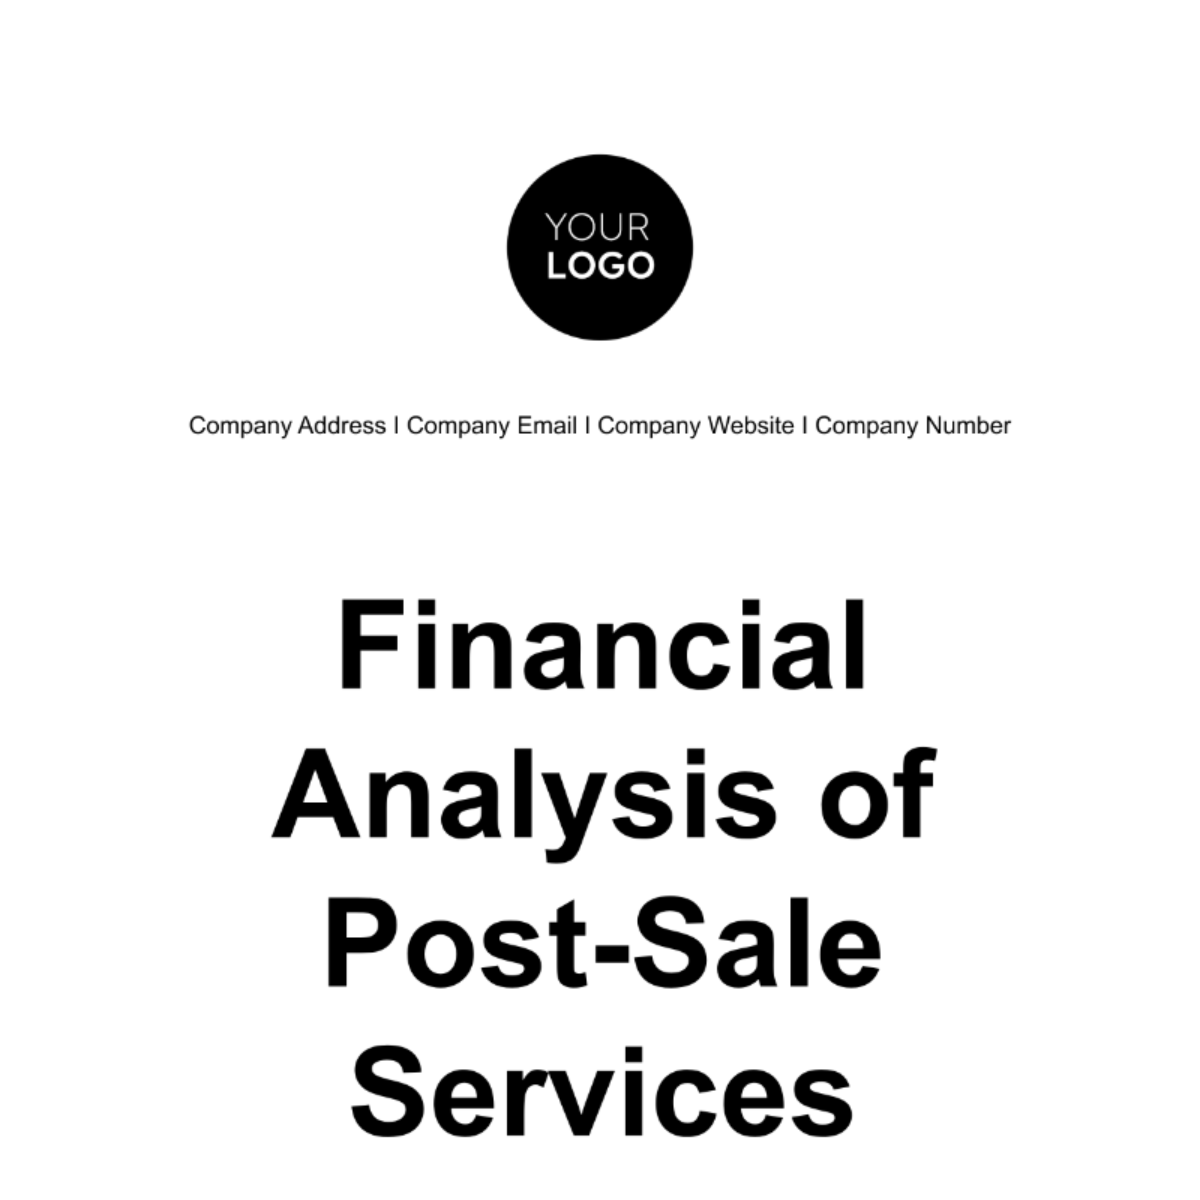 Free Financial Analysis of Post-Sale Services Template